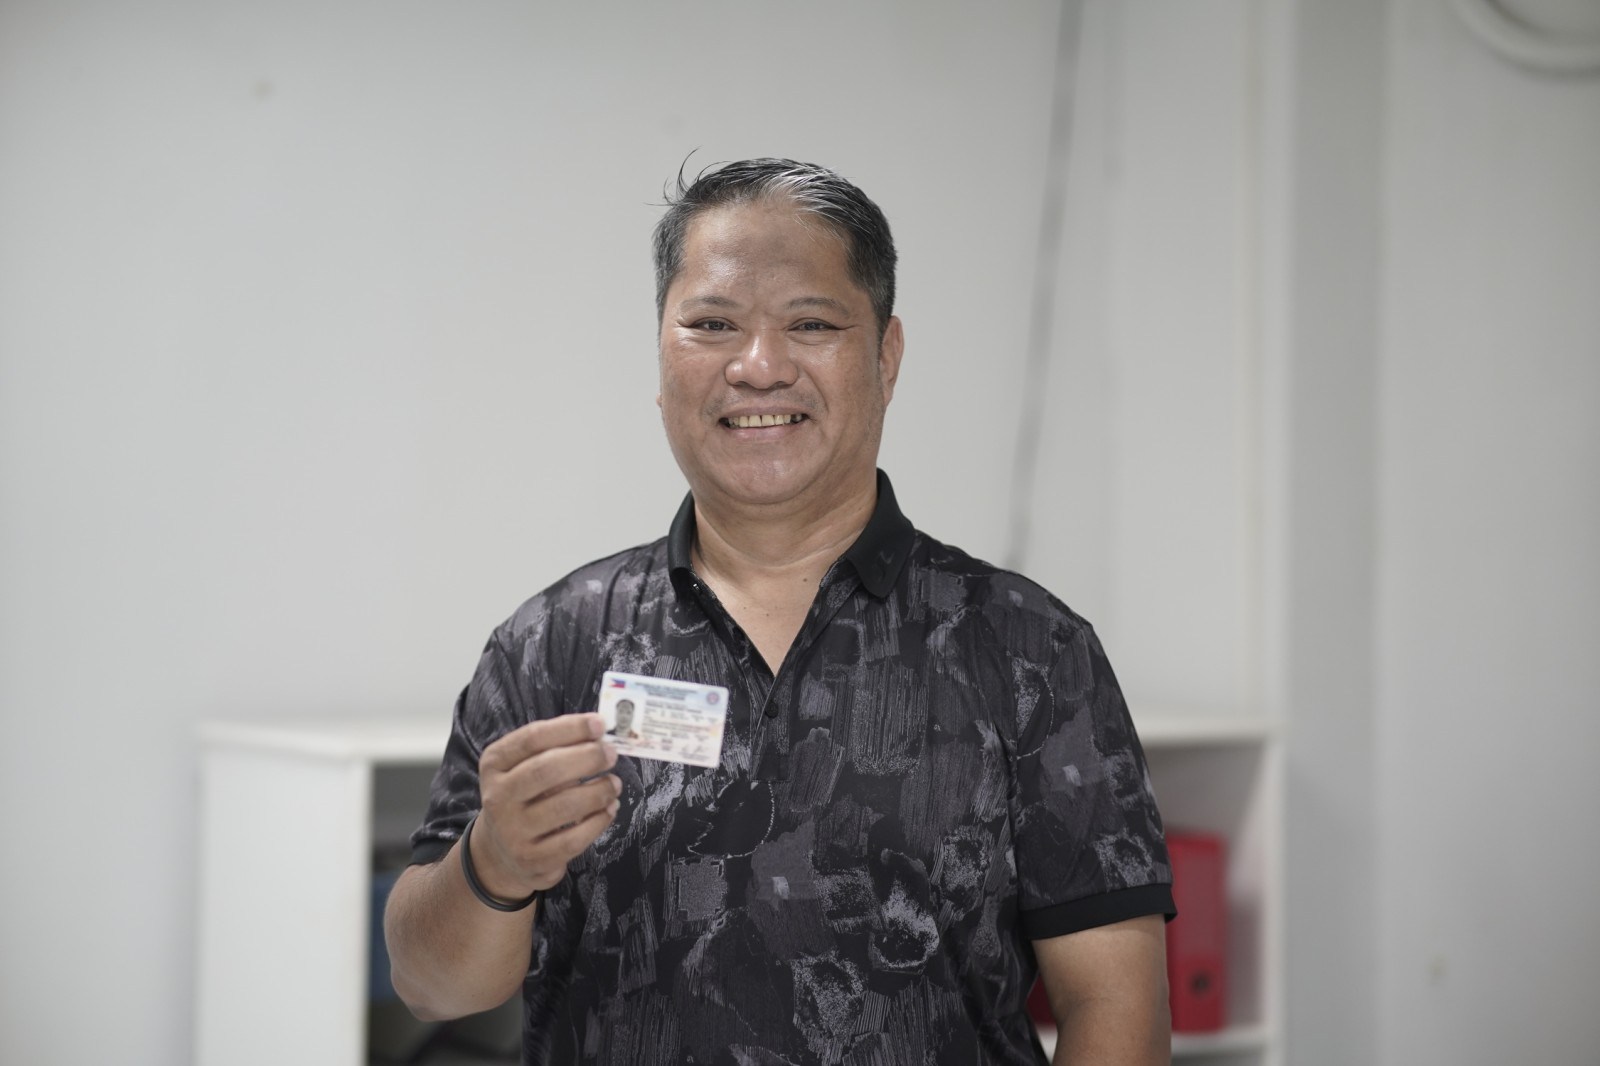 drivers license renewal - 10-year validity eligibility